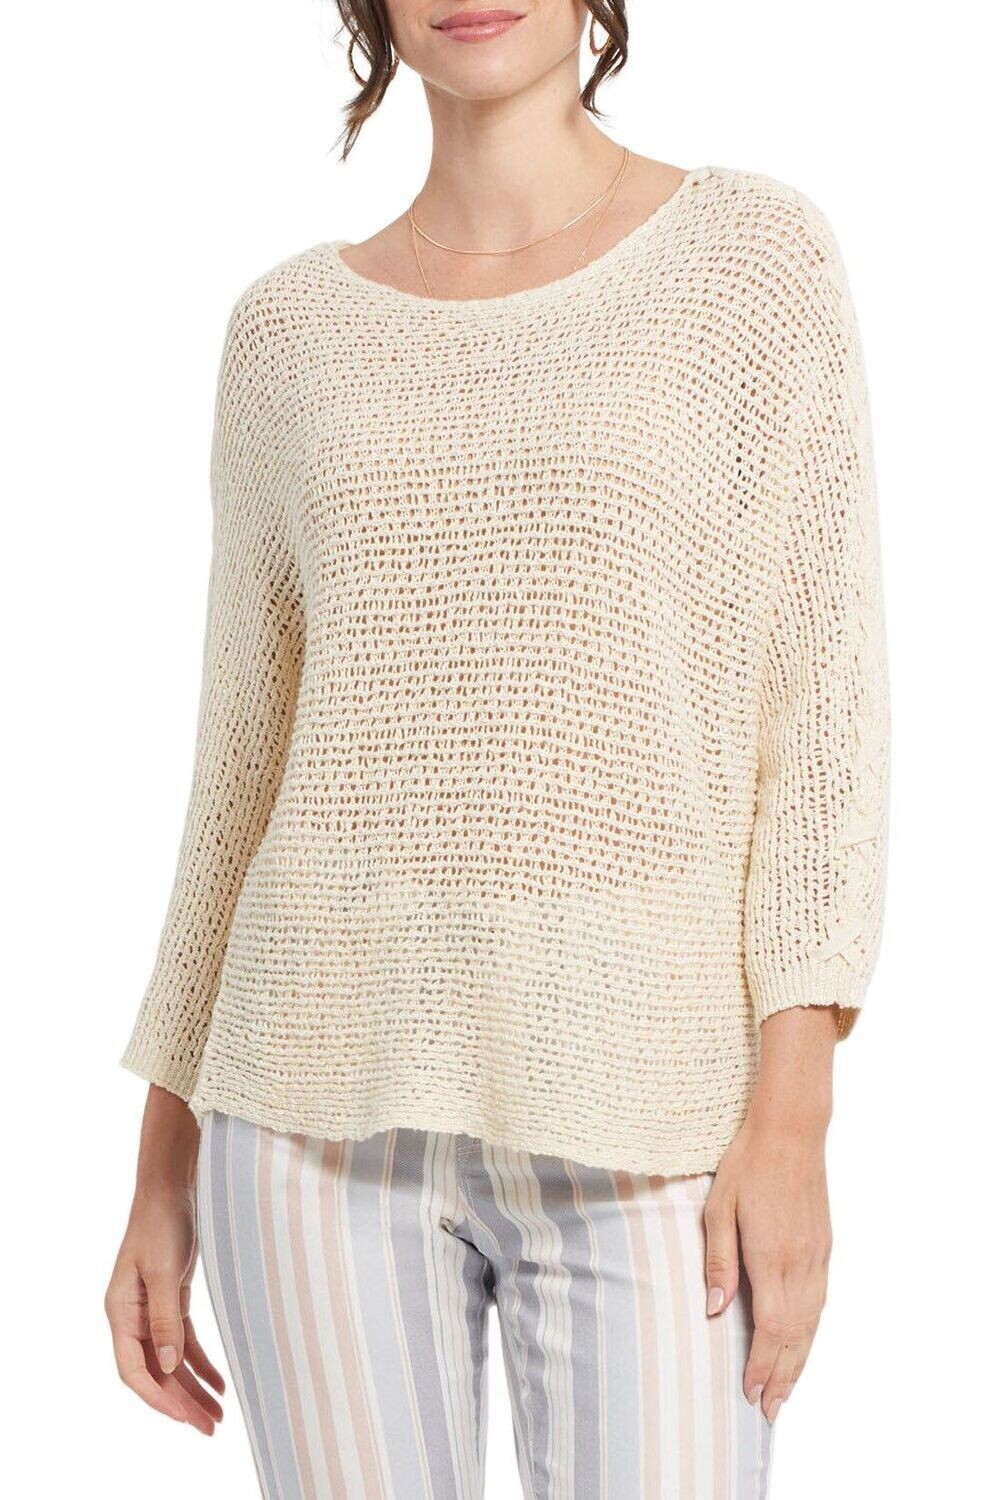 Tribal 3/4 Sleeve Boat Neck Sweater with Lace Up